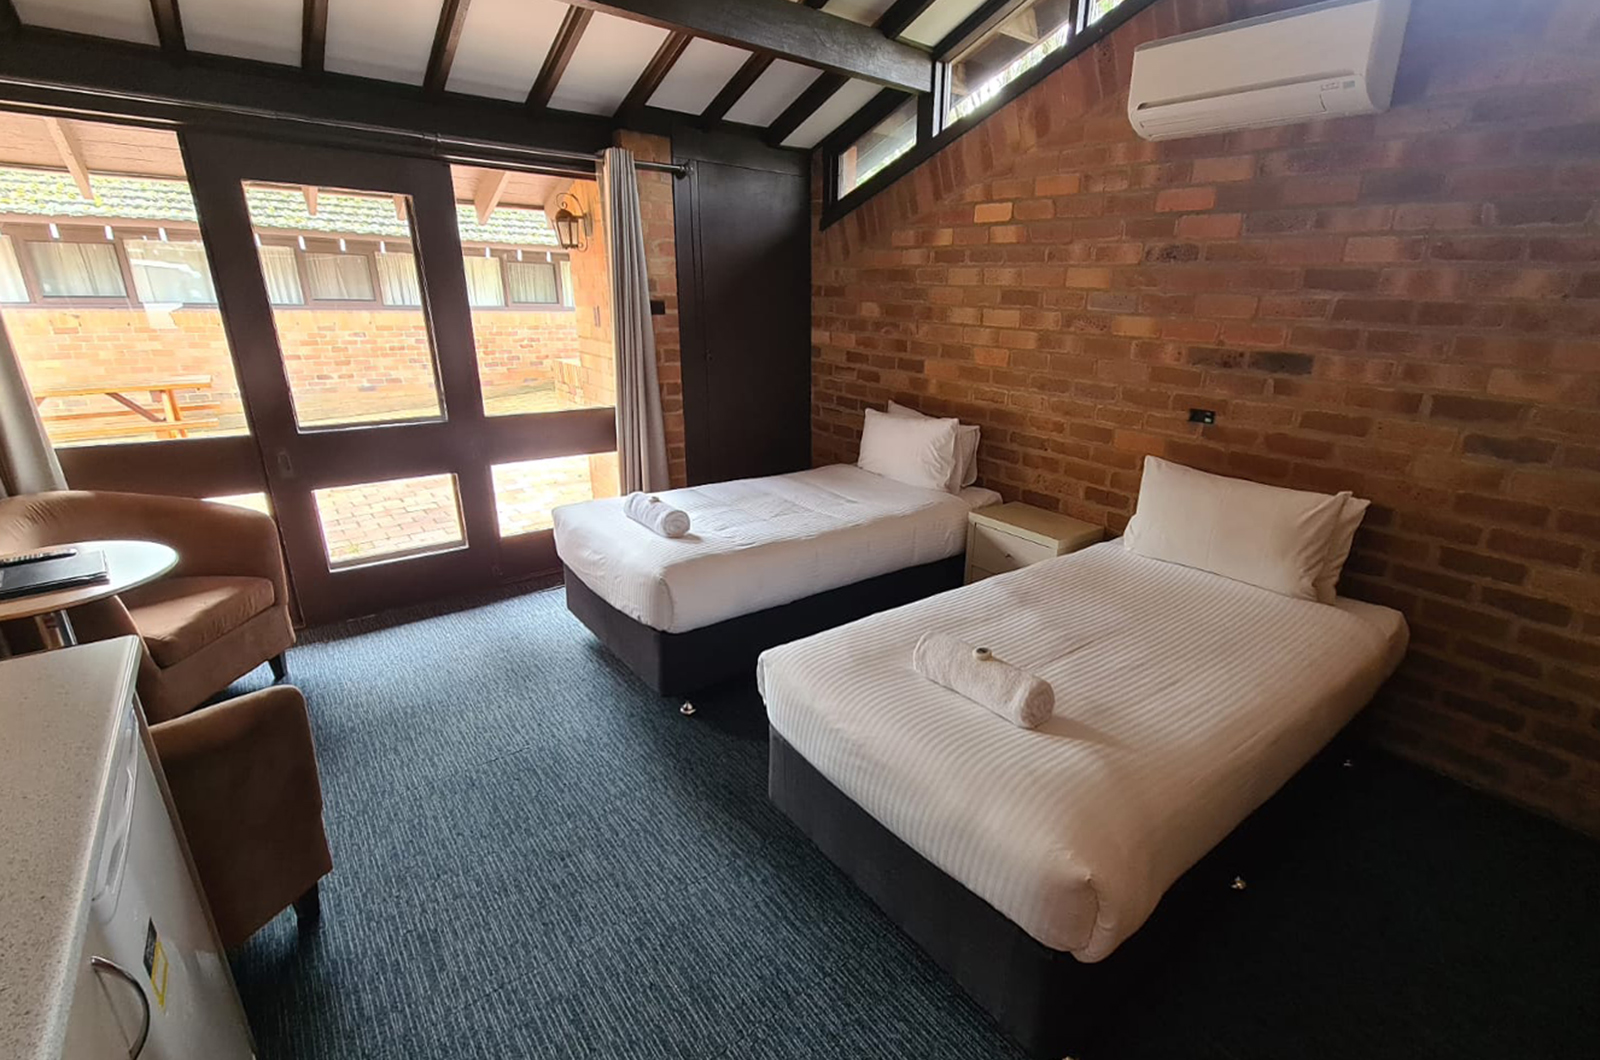 2 single beds with white linen and other furniture in a room with large windows and a glass door